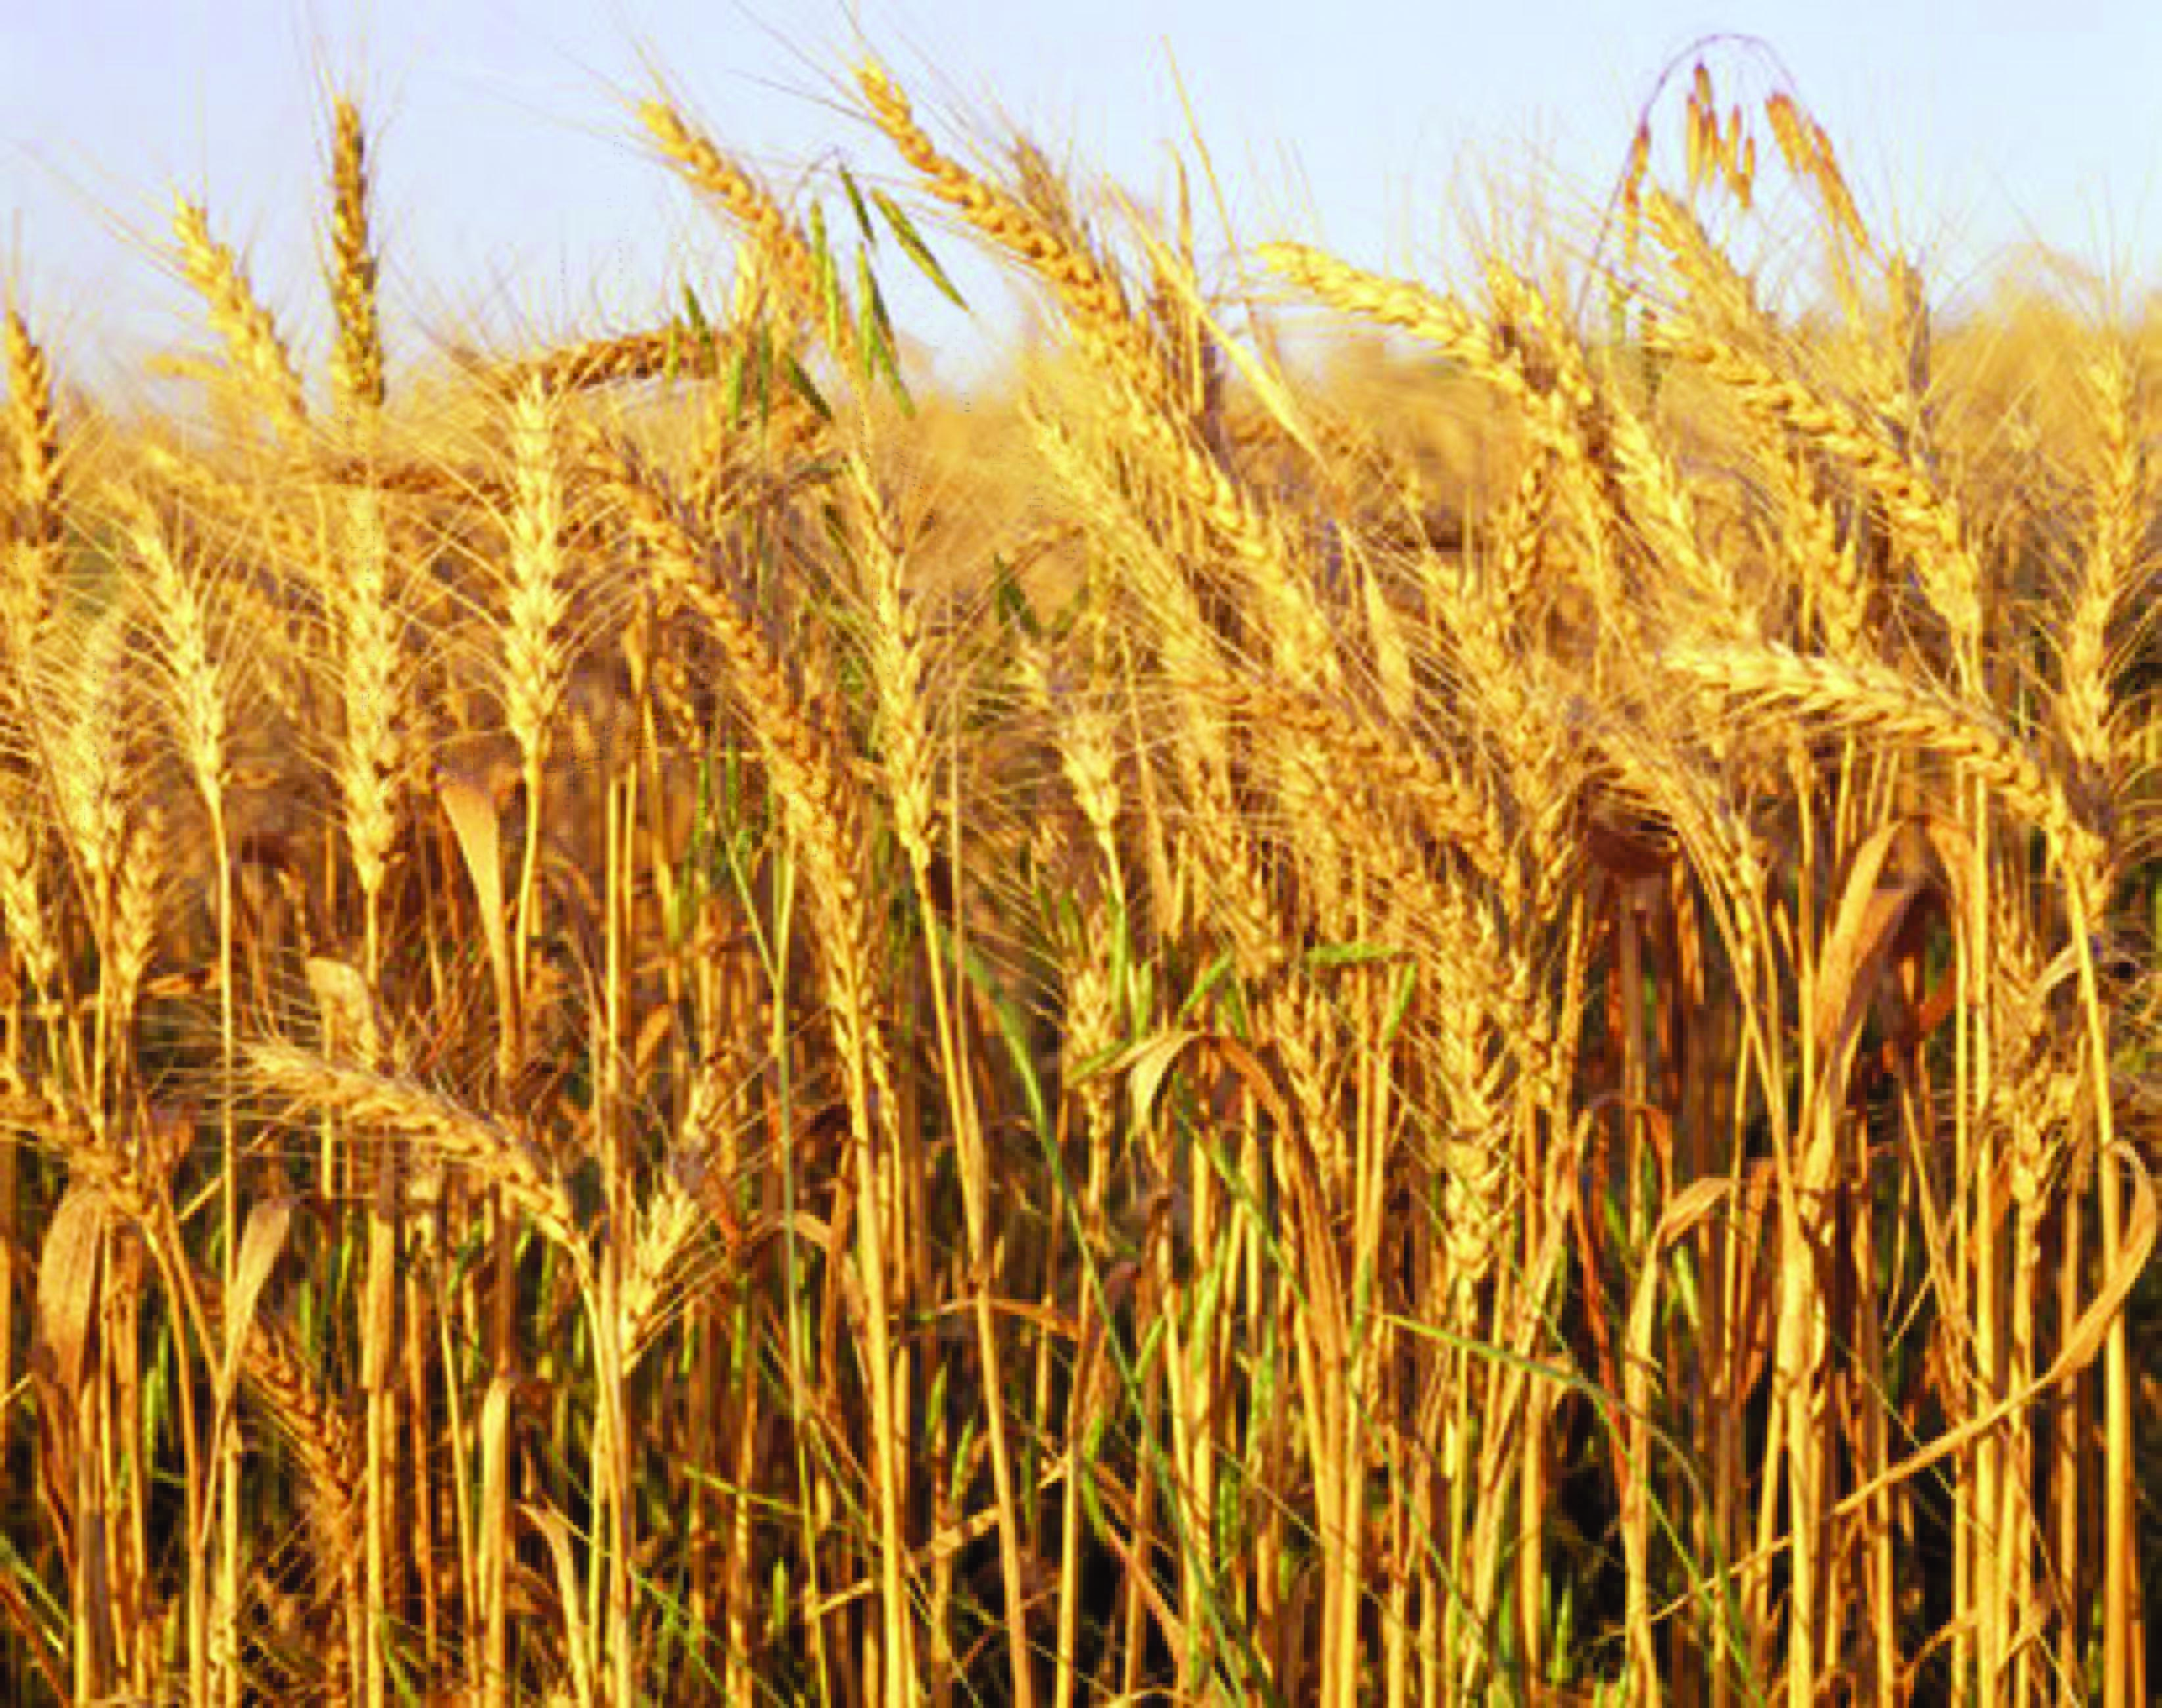 Wheat farming: Food for thought - The Zimbabwe Independent